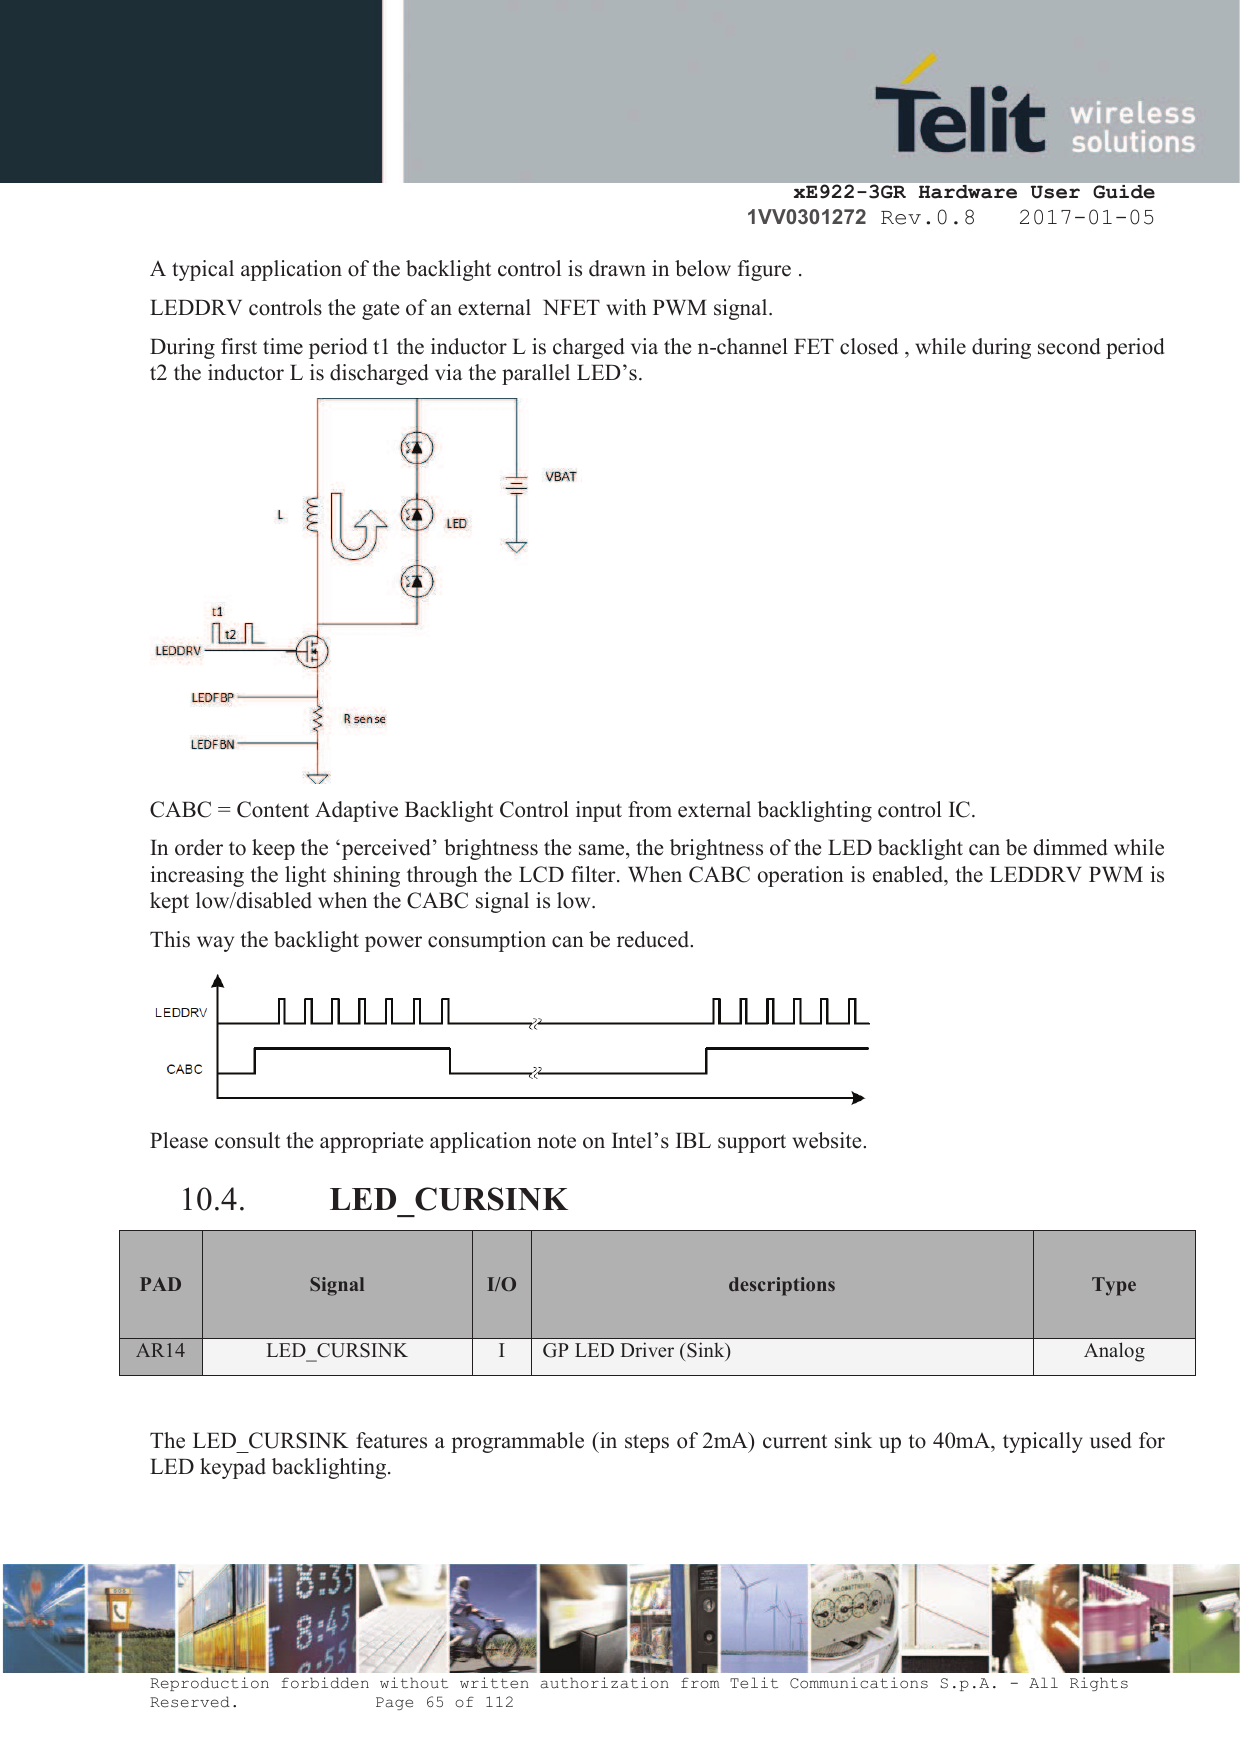     xE922-3GR Hardware User Guide 1VV0301272 Rev.0.8   2017-01-05 Reproduction forbidden without written authorization from Telit Communications S.p.A. - All Rights Reserved.    Page 65 of 112  A typical application of the backlight control is drawn in below figure . LEDDRV controls the gate of an external  NFET with PWM signal. During first time period t1 the inductor L is charged via the n-channel FET closed , while during second period t2 the inductor L is discharged via the parallel LED’s.  CABC = Content Adaptive Backlight Control input from external backlighting control IC. In order to keep the ‘perceived’ brightness the same, the brightness of the LED backlight can be dimmed while increasing the light shining through the LCD filter. When CABC operation is enabled, the LEDDRV PWM is kept low/disabled when the CABC signal is low. This way the backlight power consumption can be reduced.   Please consult the appropriate application note on Intel’s IBL support website. 10.4. LED_CURSINK PAD Signal I/O descriptions  Type AR14 LED_CURSINK I GP LED Driver (Sink)  Analog   The LED_CURSINK features a programmable (in steps of 2mA) current sink up to 40mA, typically used for LED keypad backlighting. 